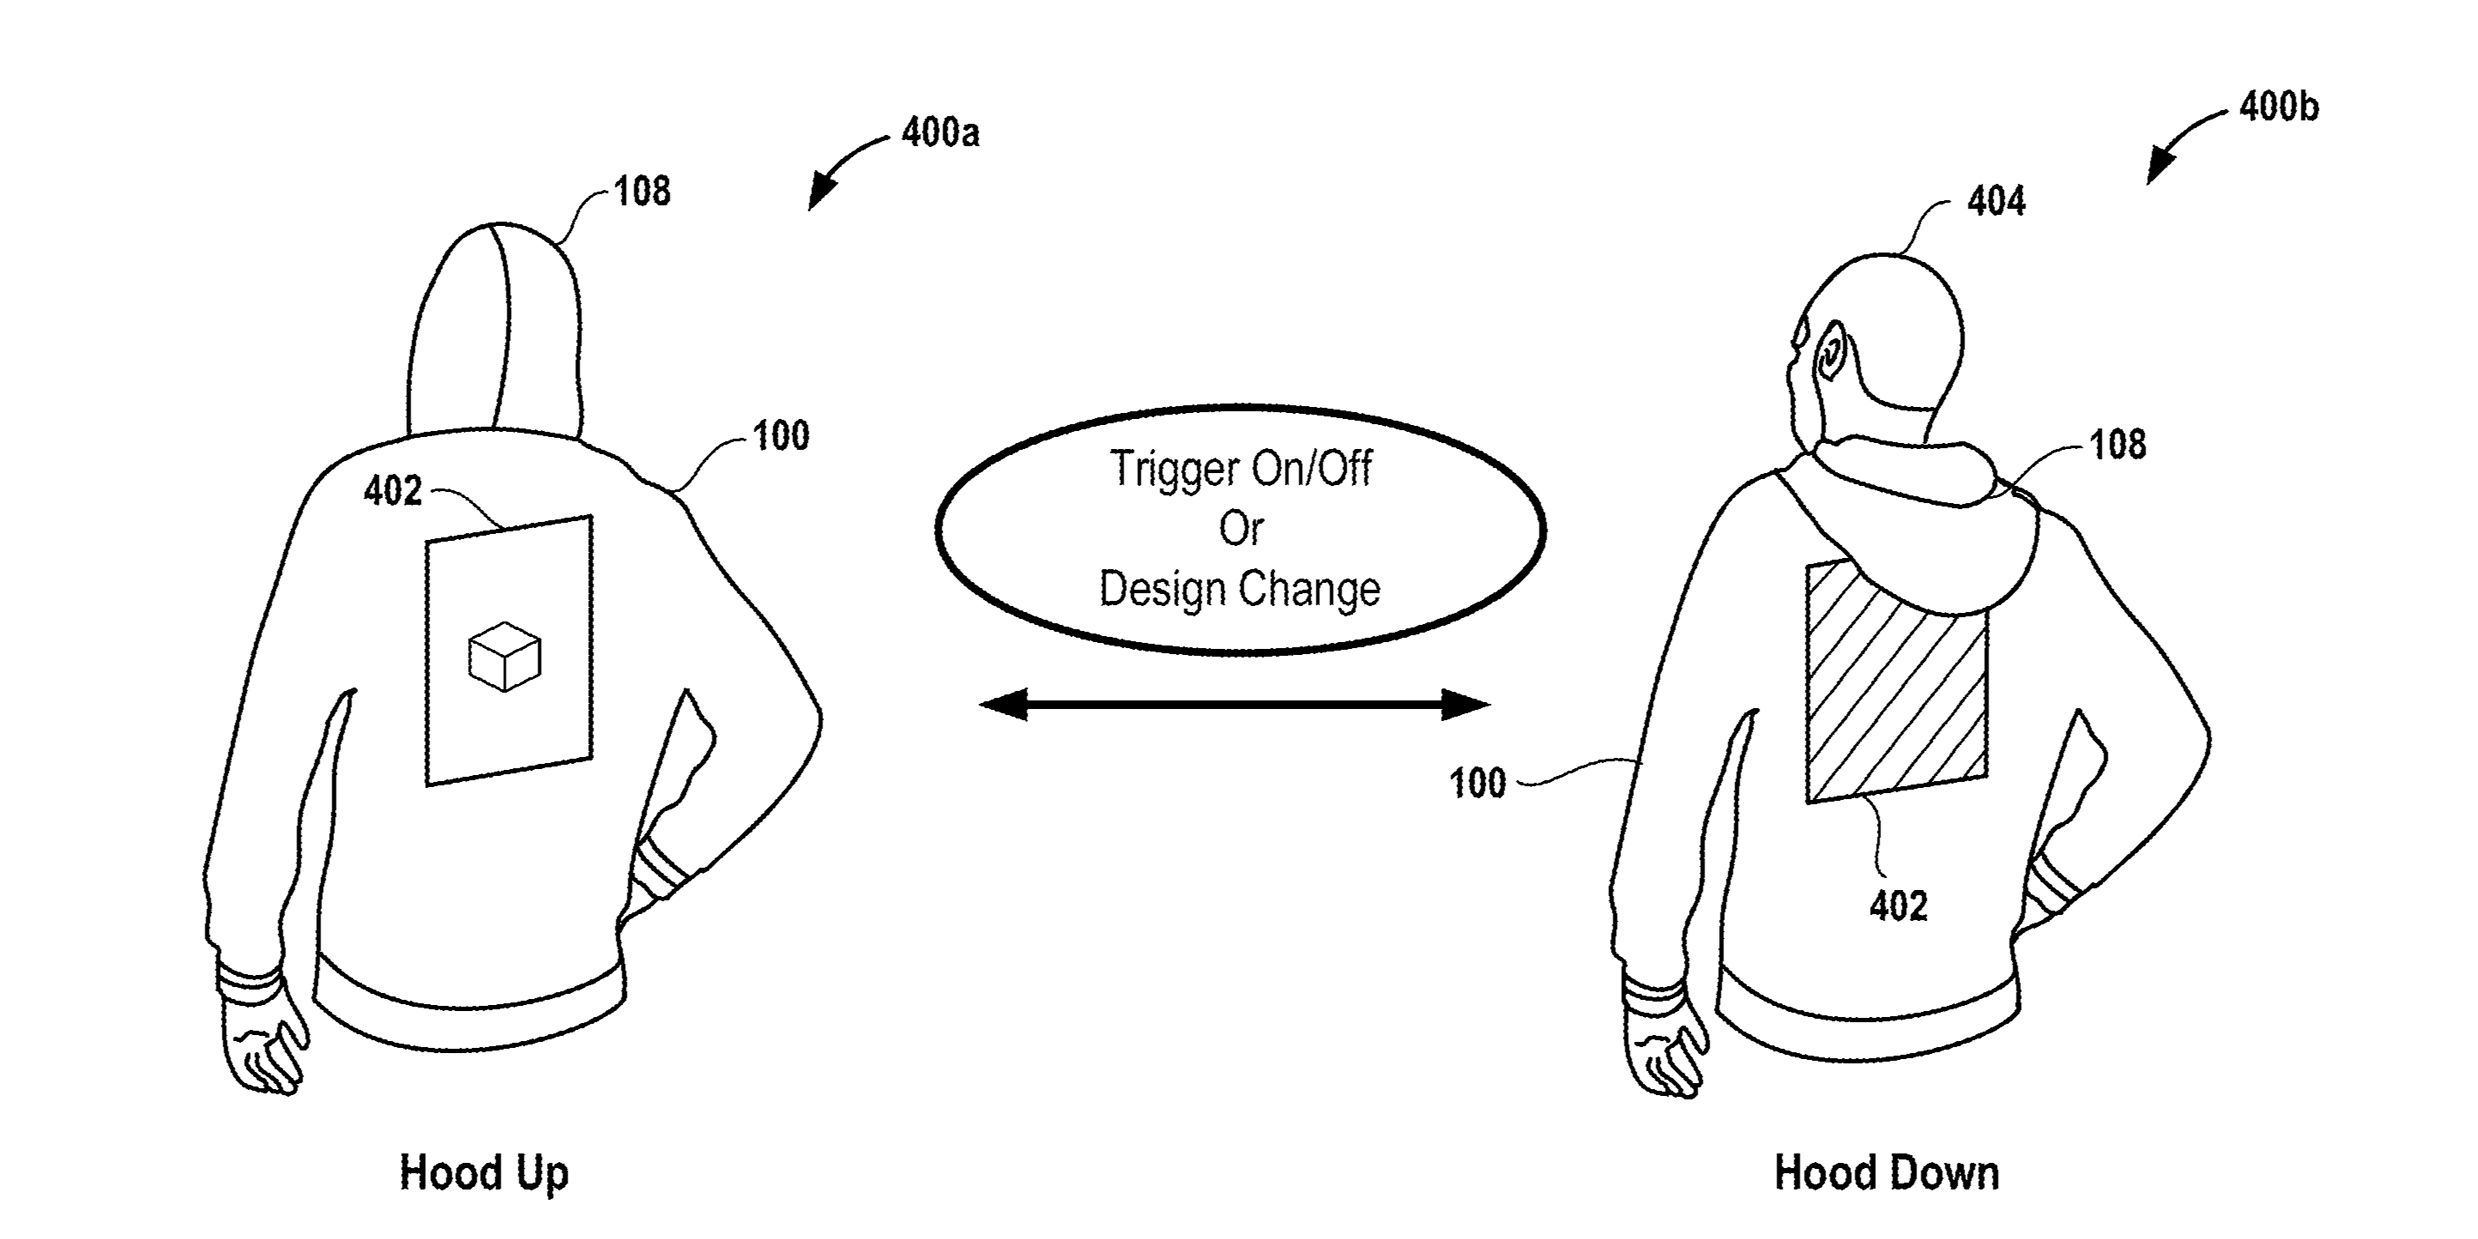 sony-clothing-patent-hood-up-down